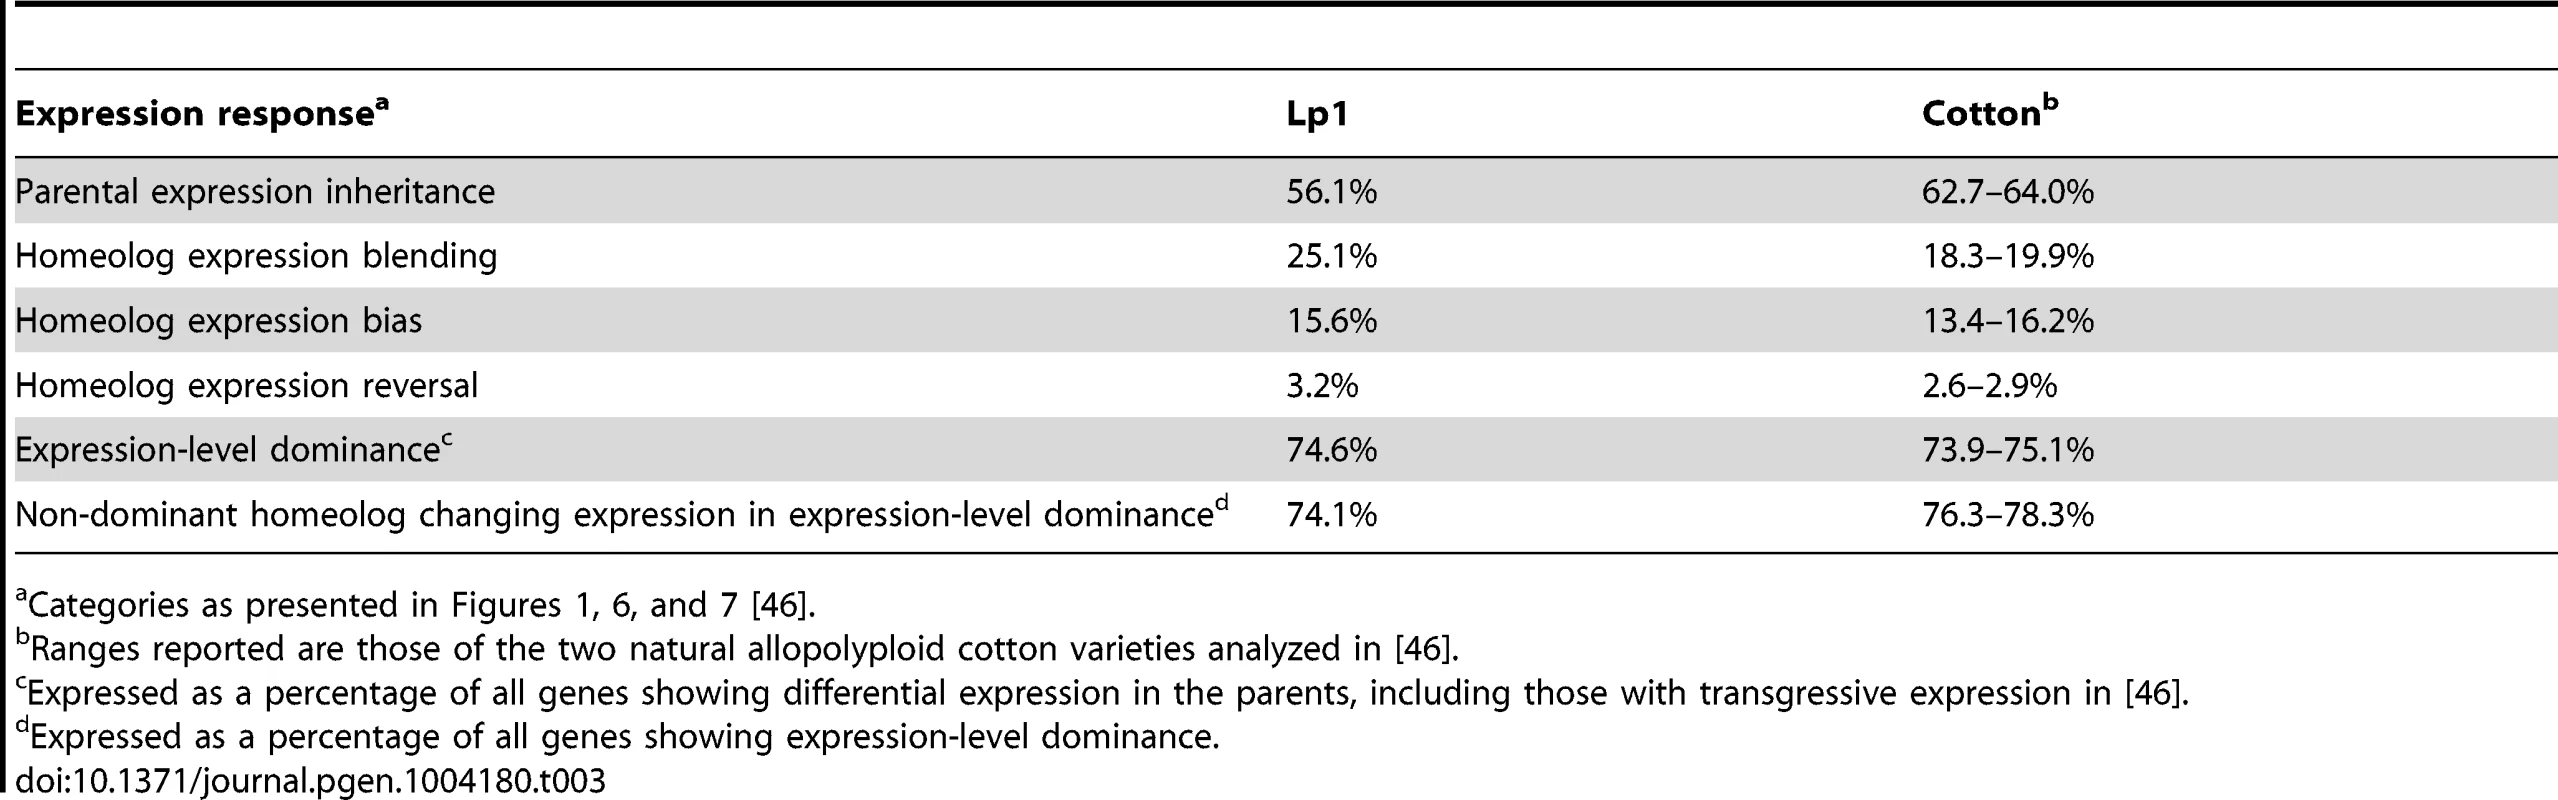 Similarities in the transcriptional response to allopolyploidy in Lp1 and natural cotton allopolyploids.